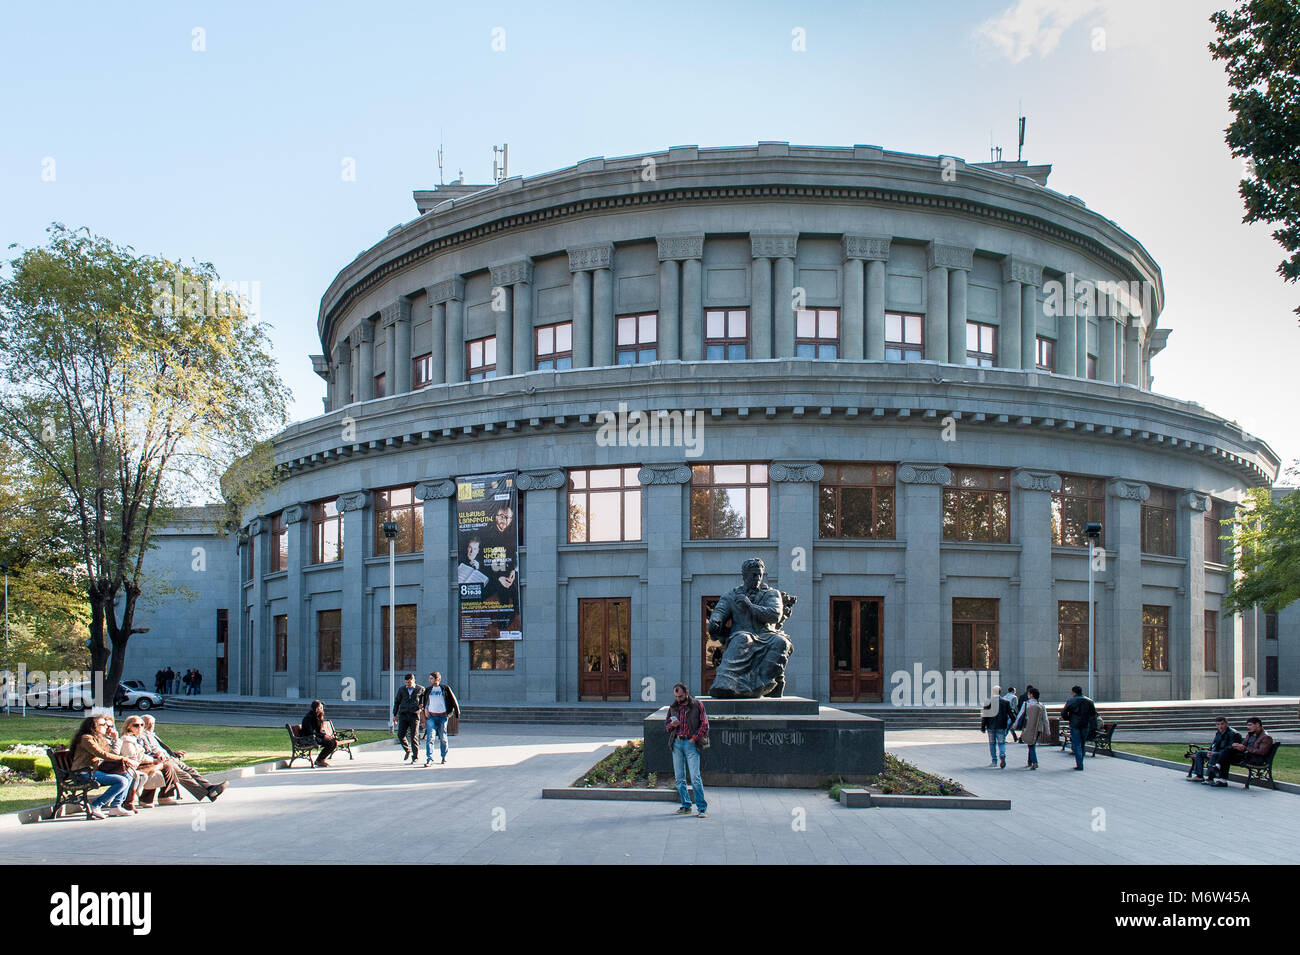 Armenian National Academic Theatre of Opera and Ballet in Yerevan. The Opera is one of the main landmarks of the city. Stock Photo